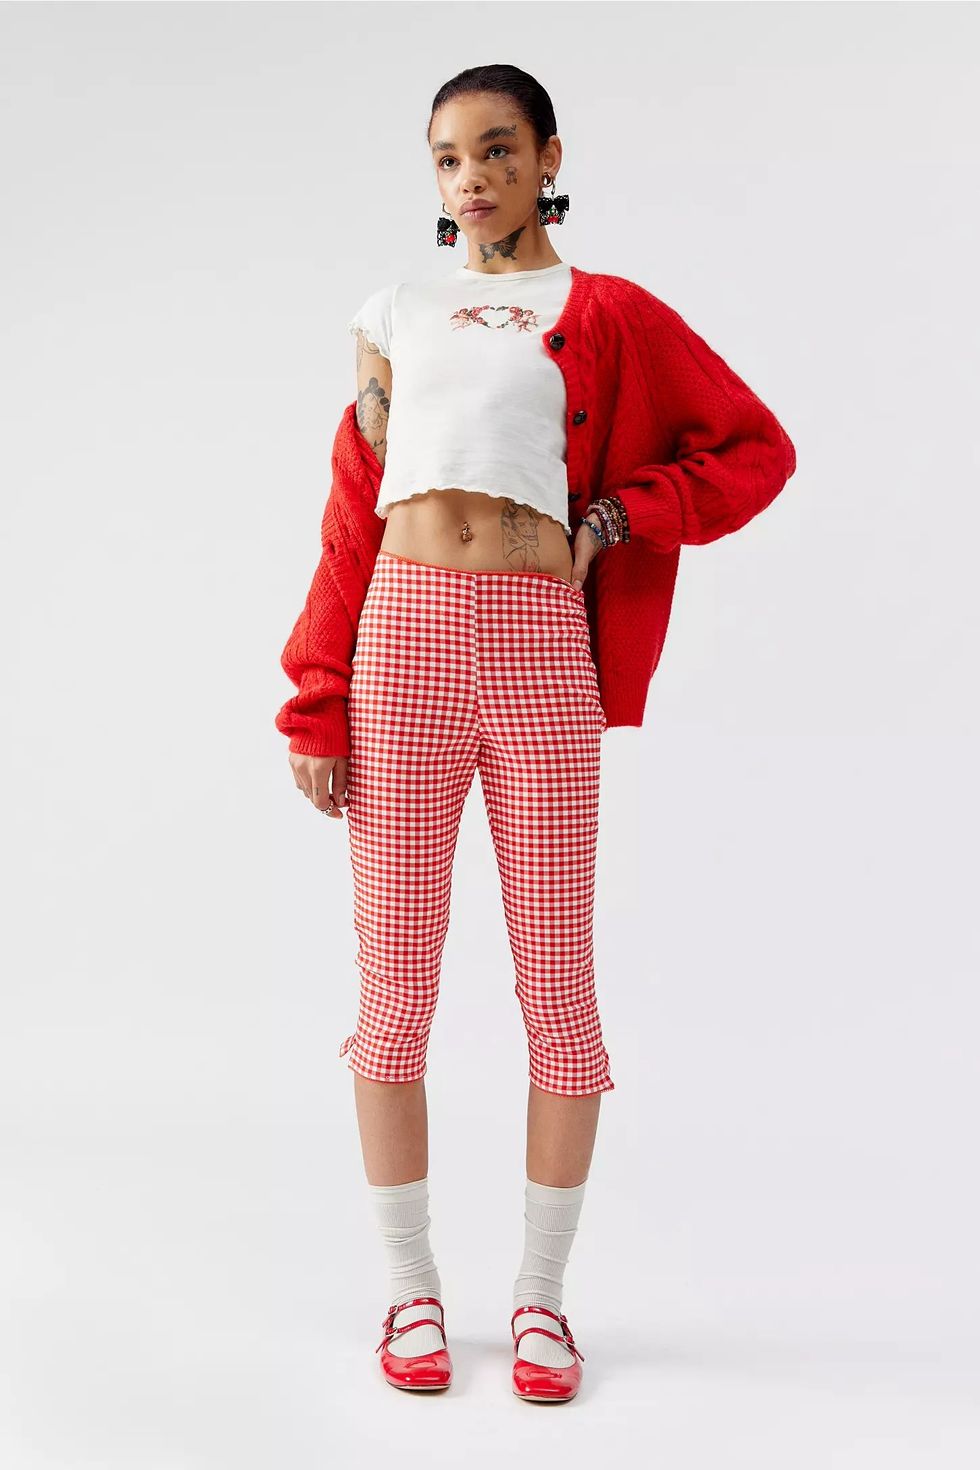 Urban Outfitters Gingham Capris